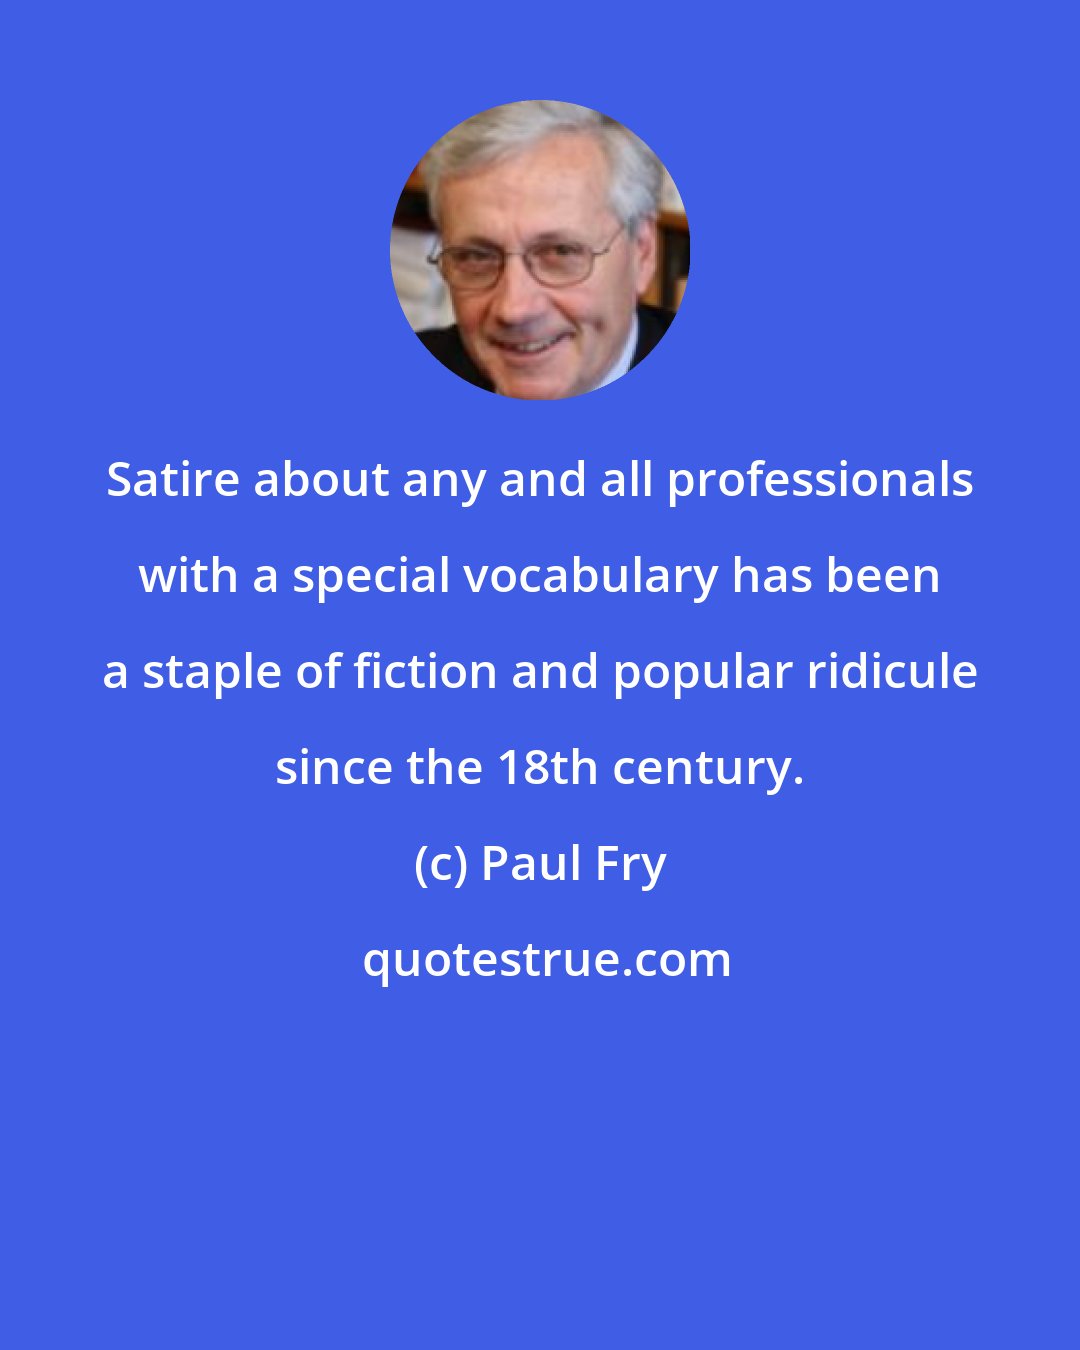 Paul Fry: Satire about any and all professionals with a special vocabulary has been a staple of fiction and popular ridicule since the 18th century.